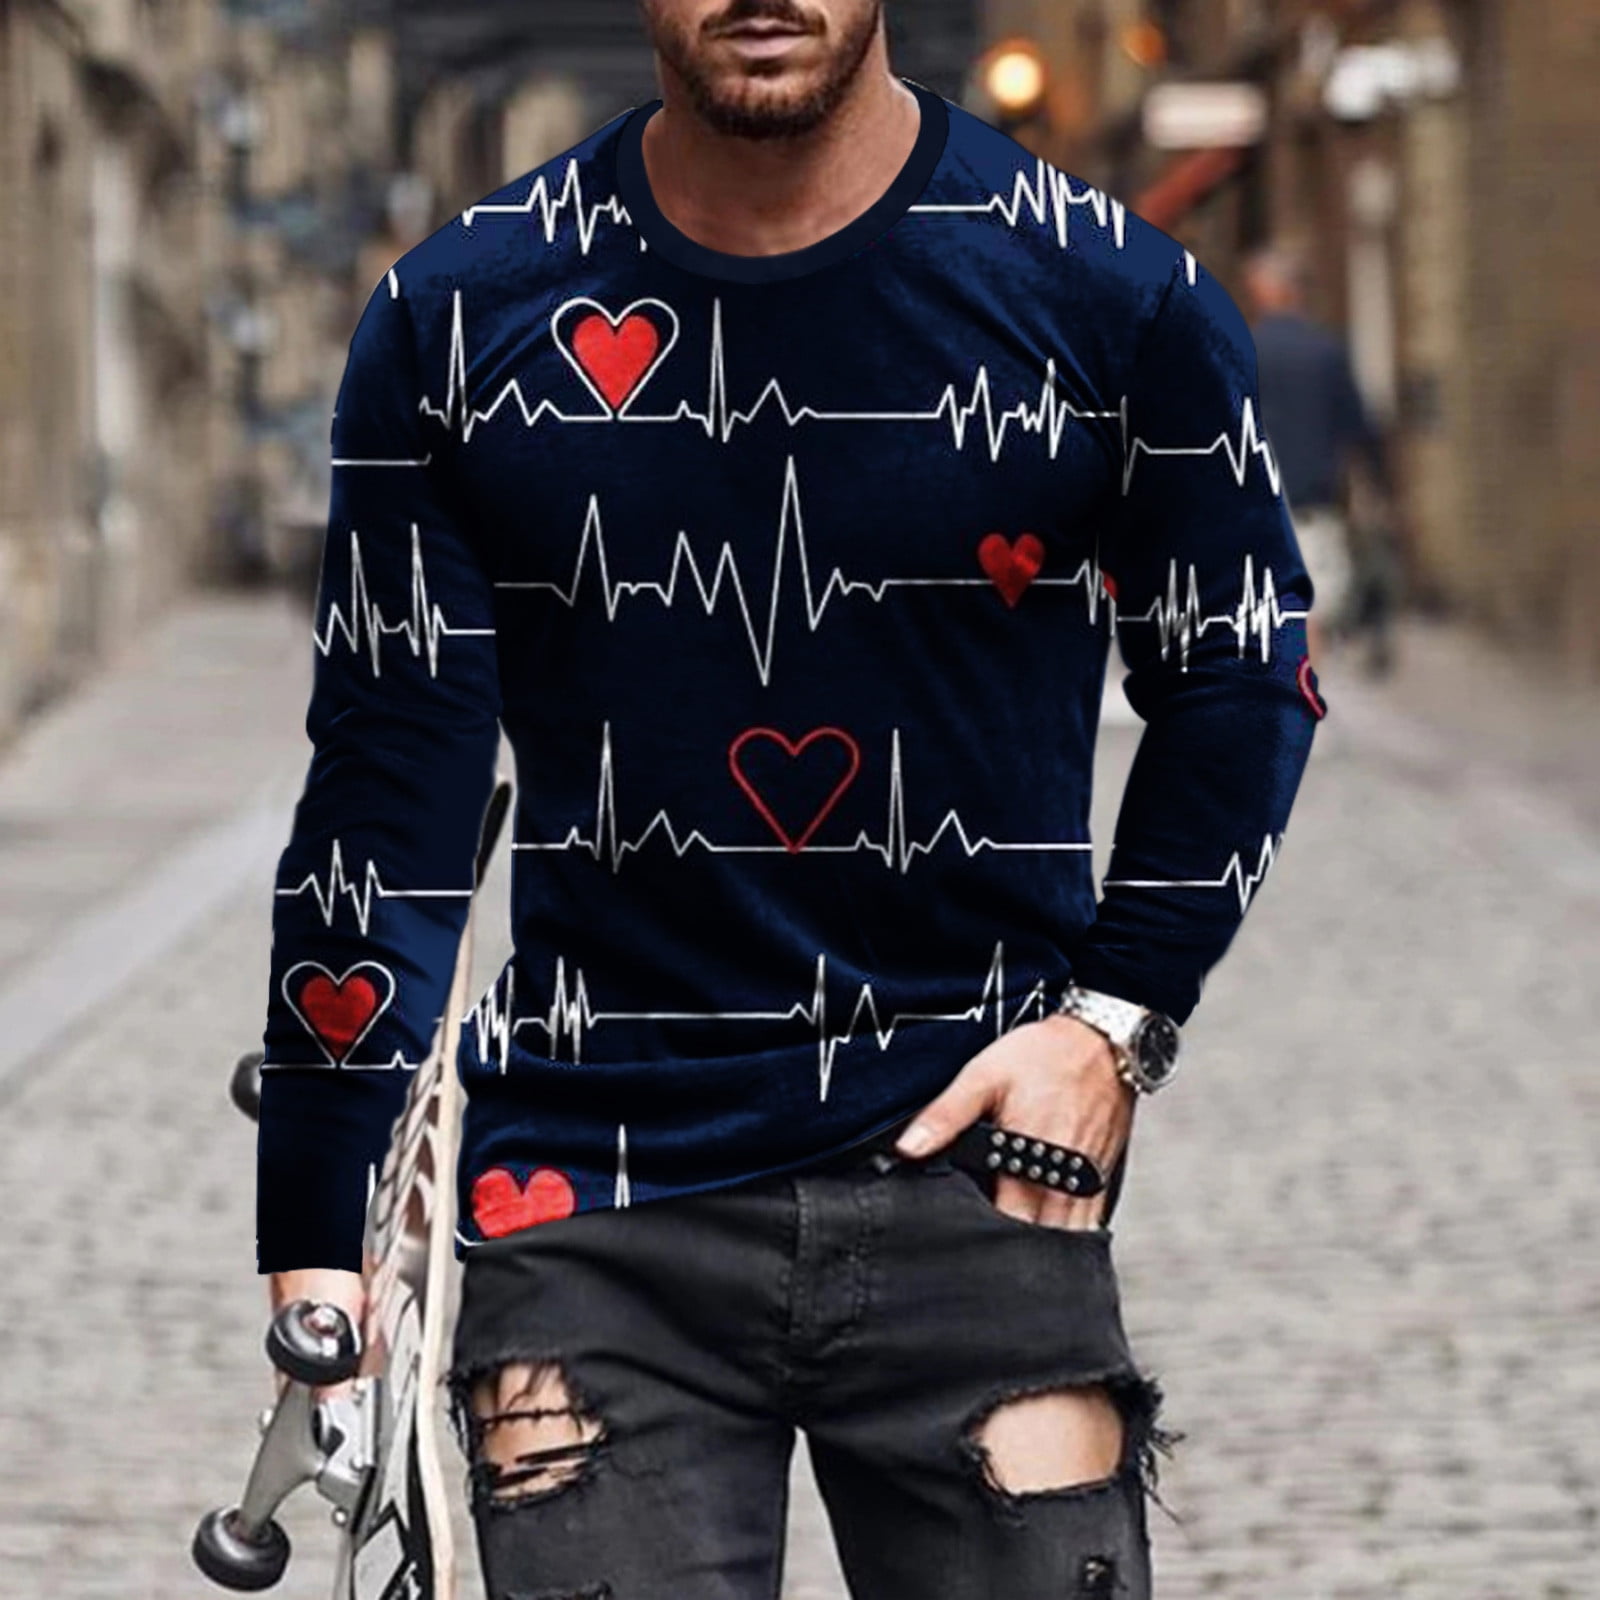 YYDGH Mens Long Sleeve T-Shirt Fashion 3D Funny Heart Print Valentine's Day  Sweater Round Neck Casual Plus Size Shirts Blouse Tops(10#White,M) 